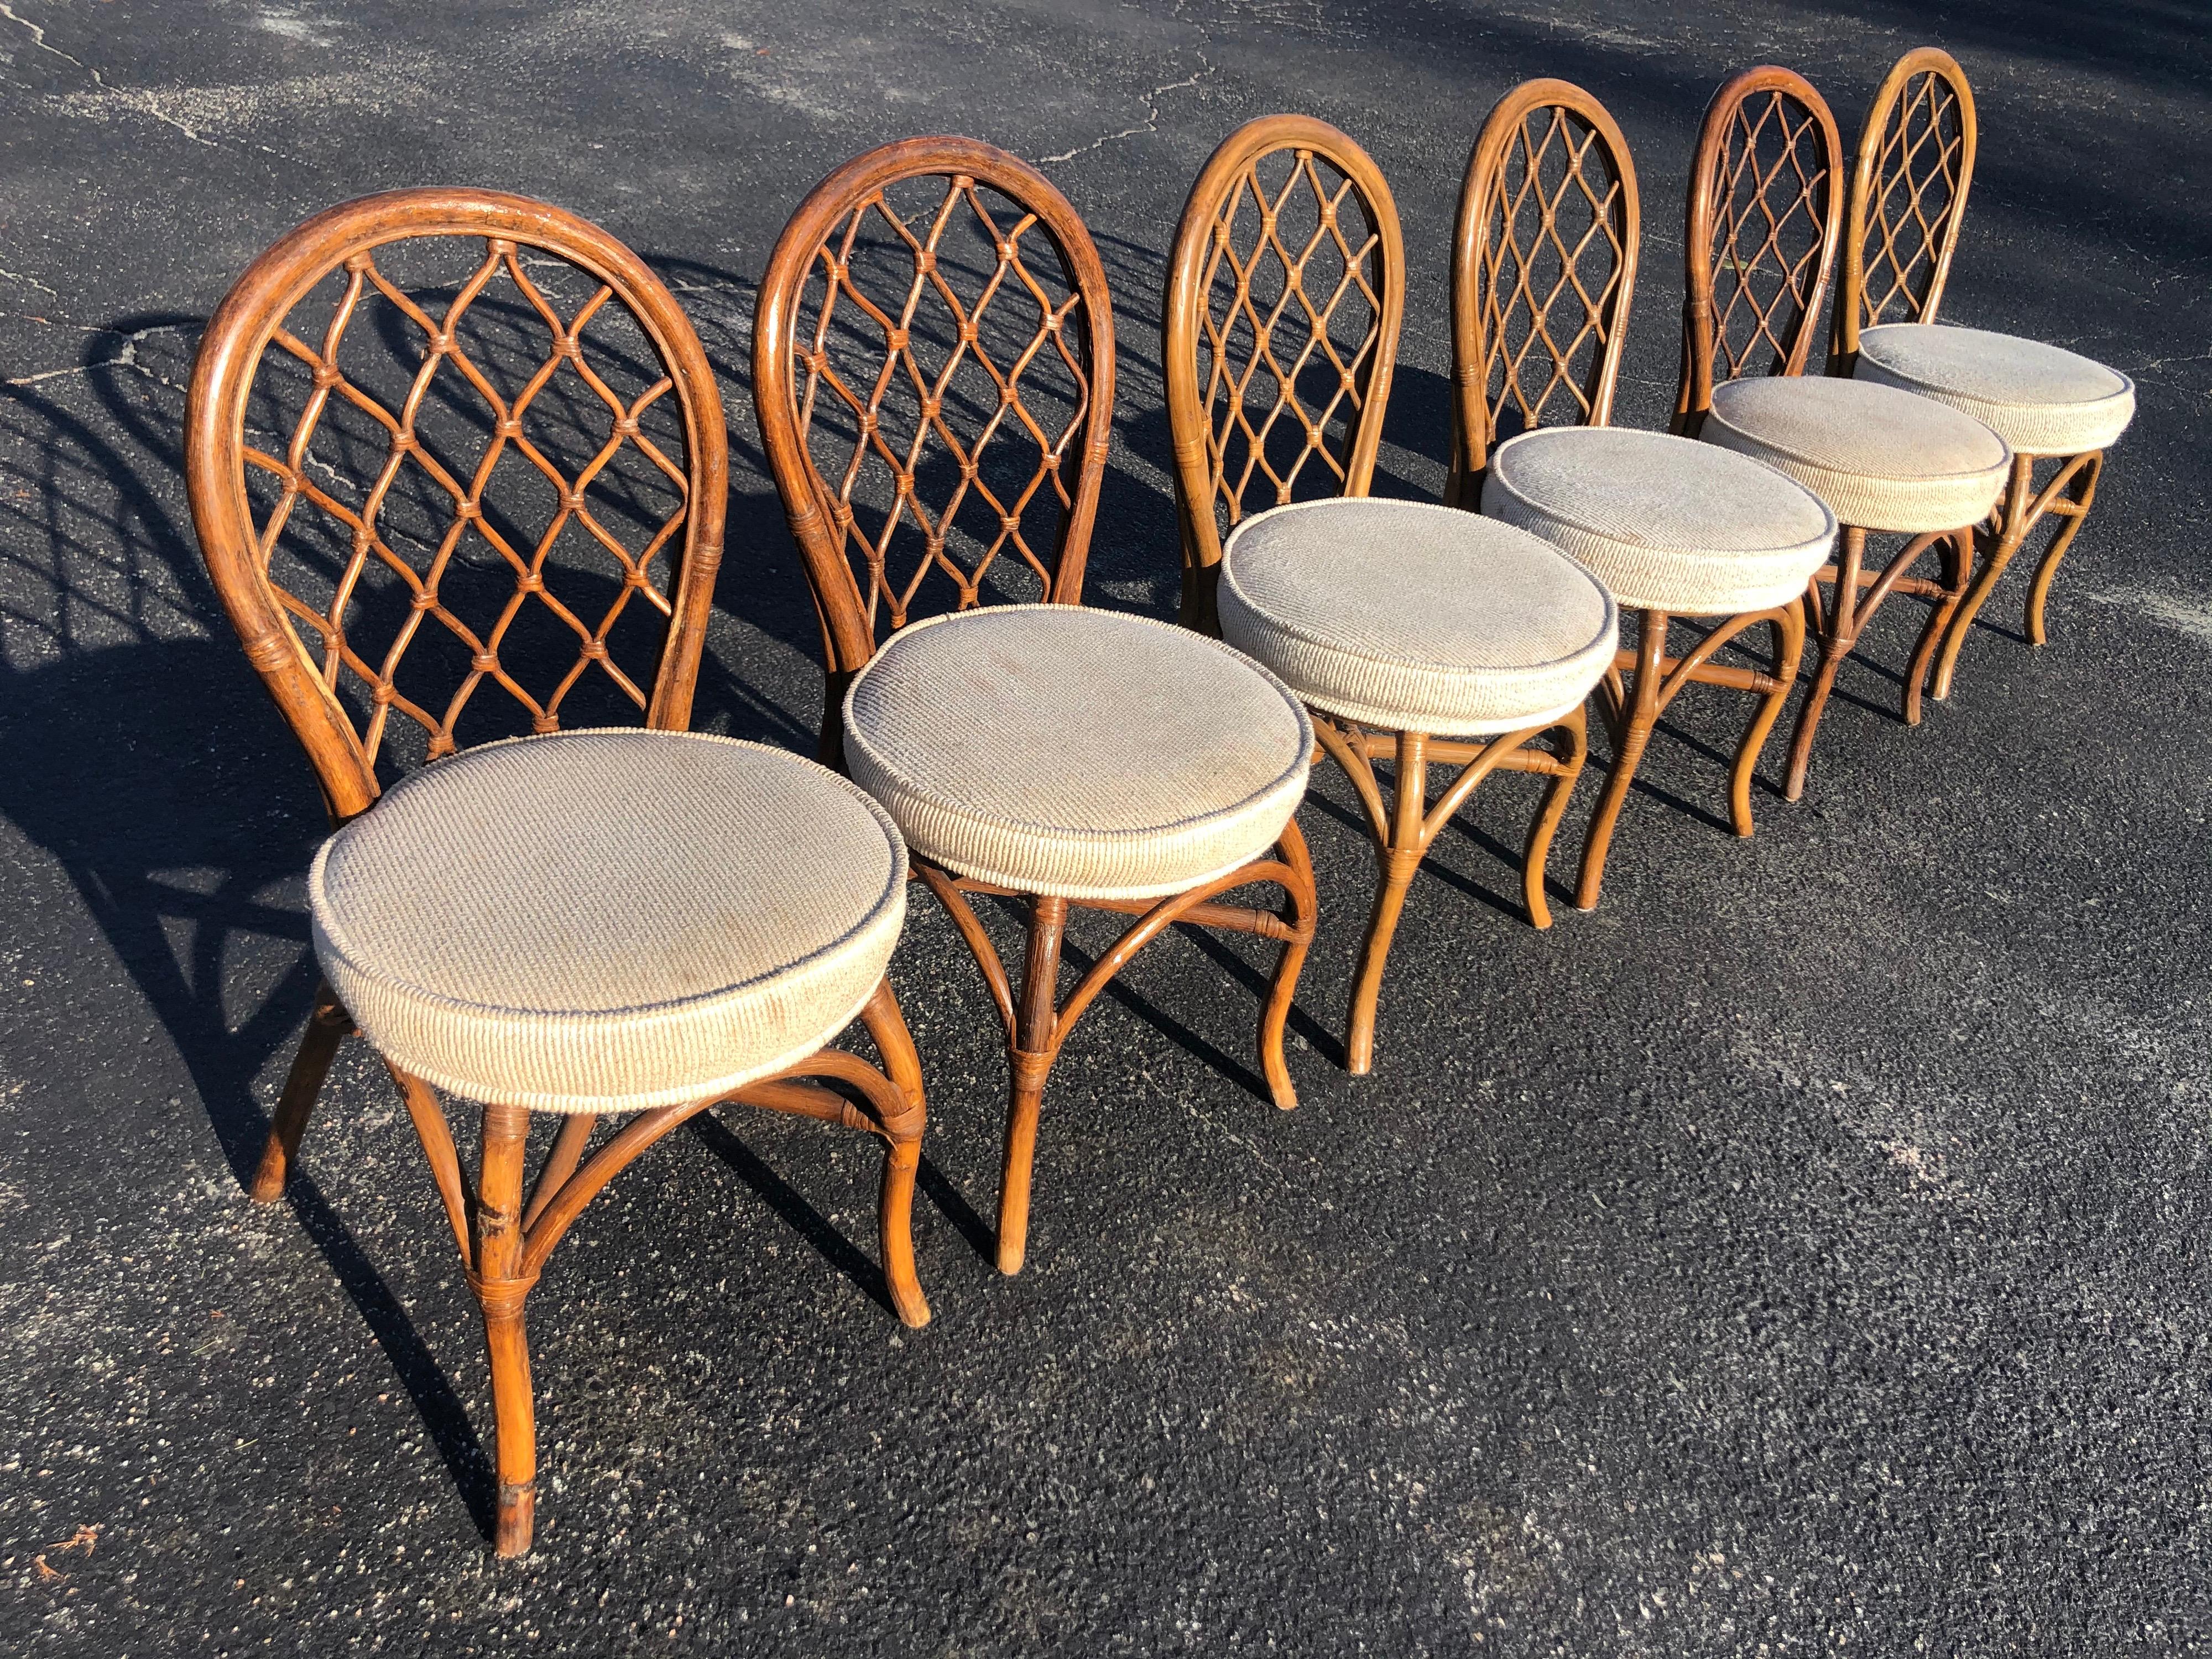 Set of six bamboo chairs. We also have a matching table these go with. Please see last photo.
Can discount if both are purchased together.
 